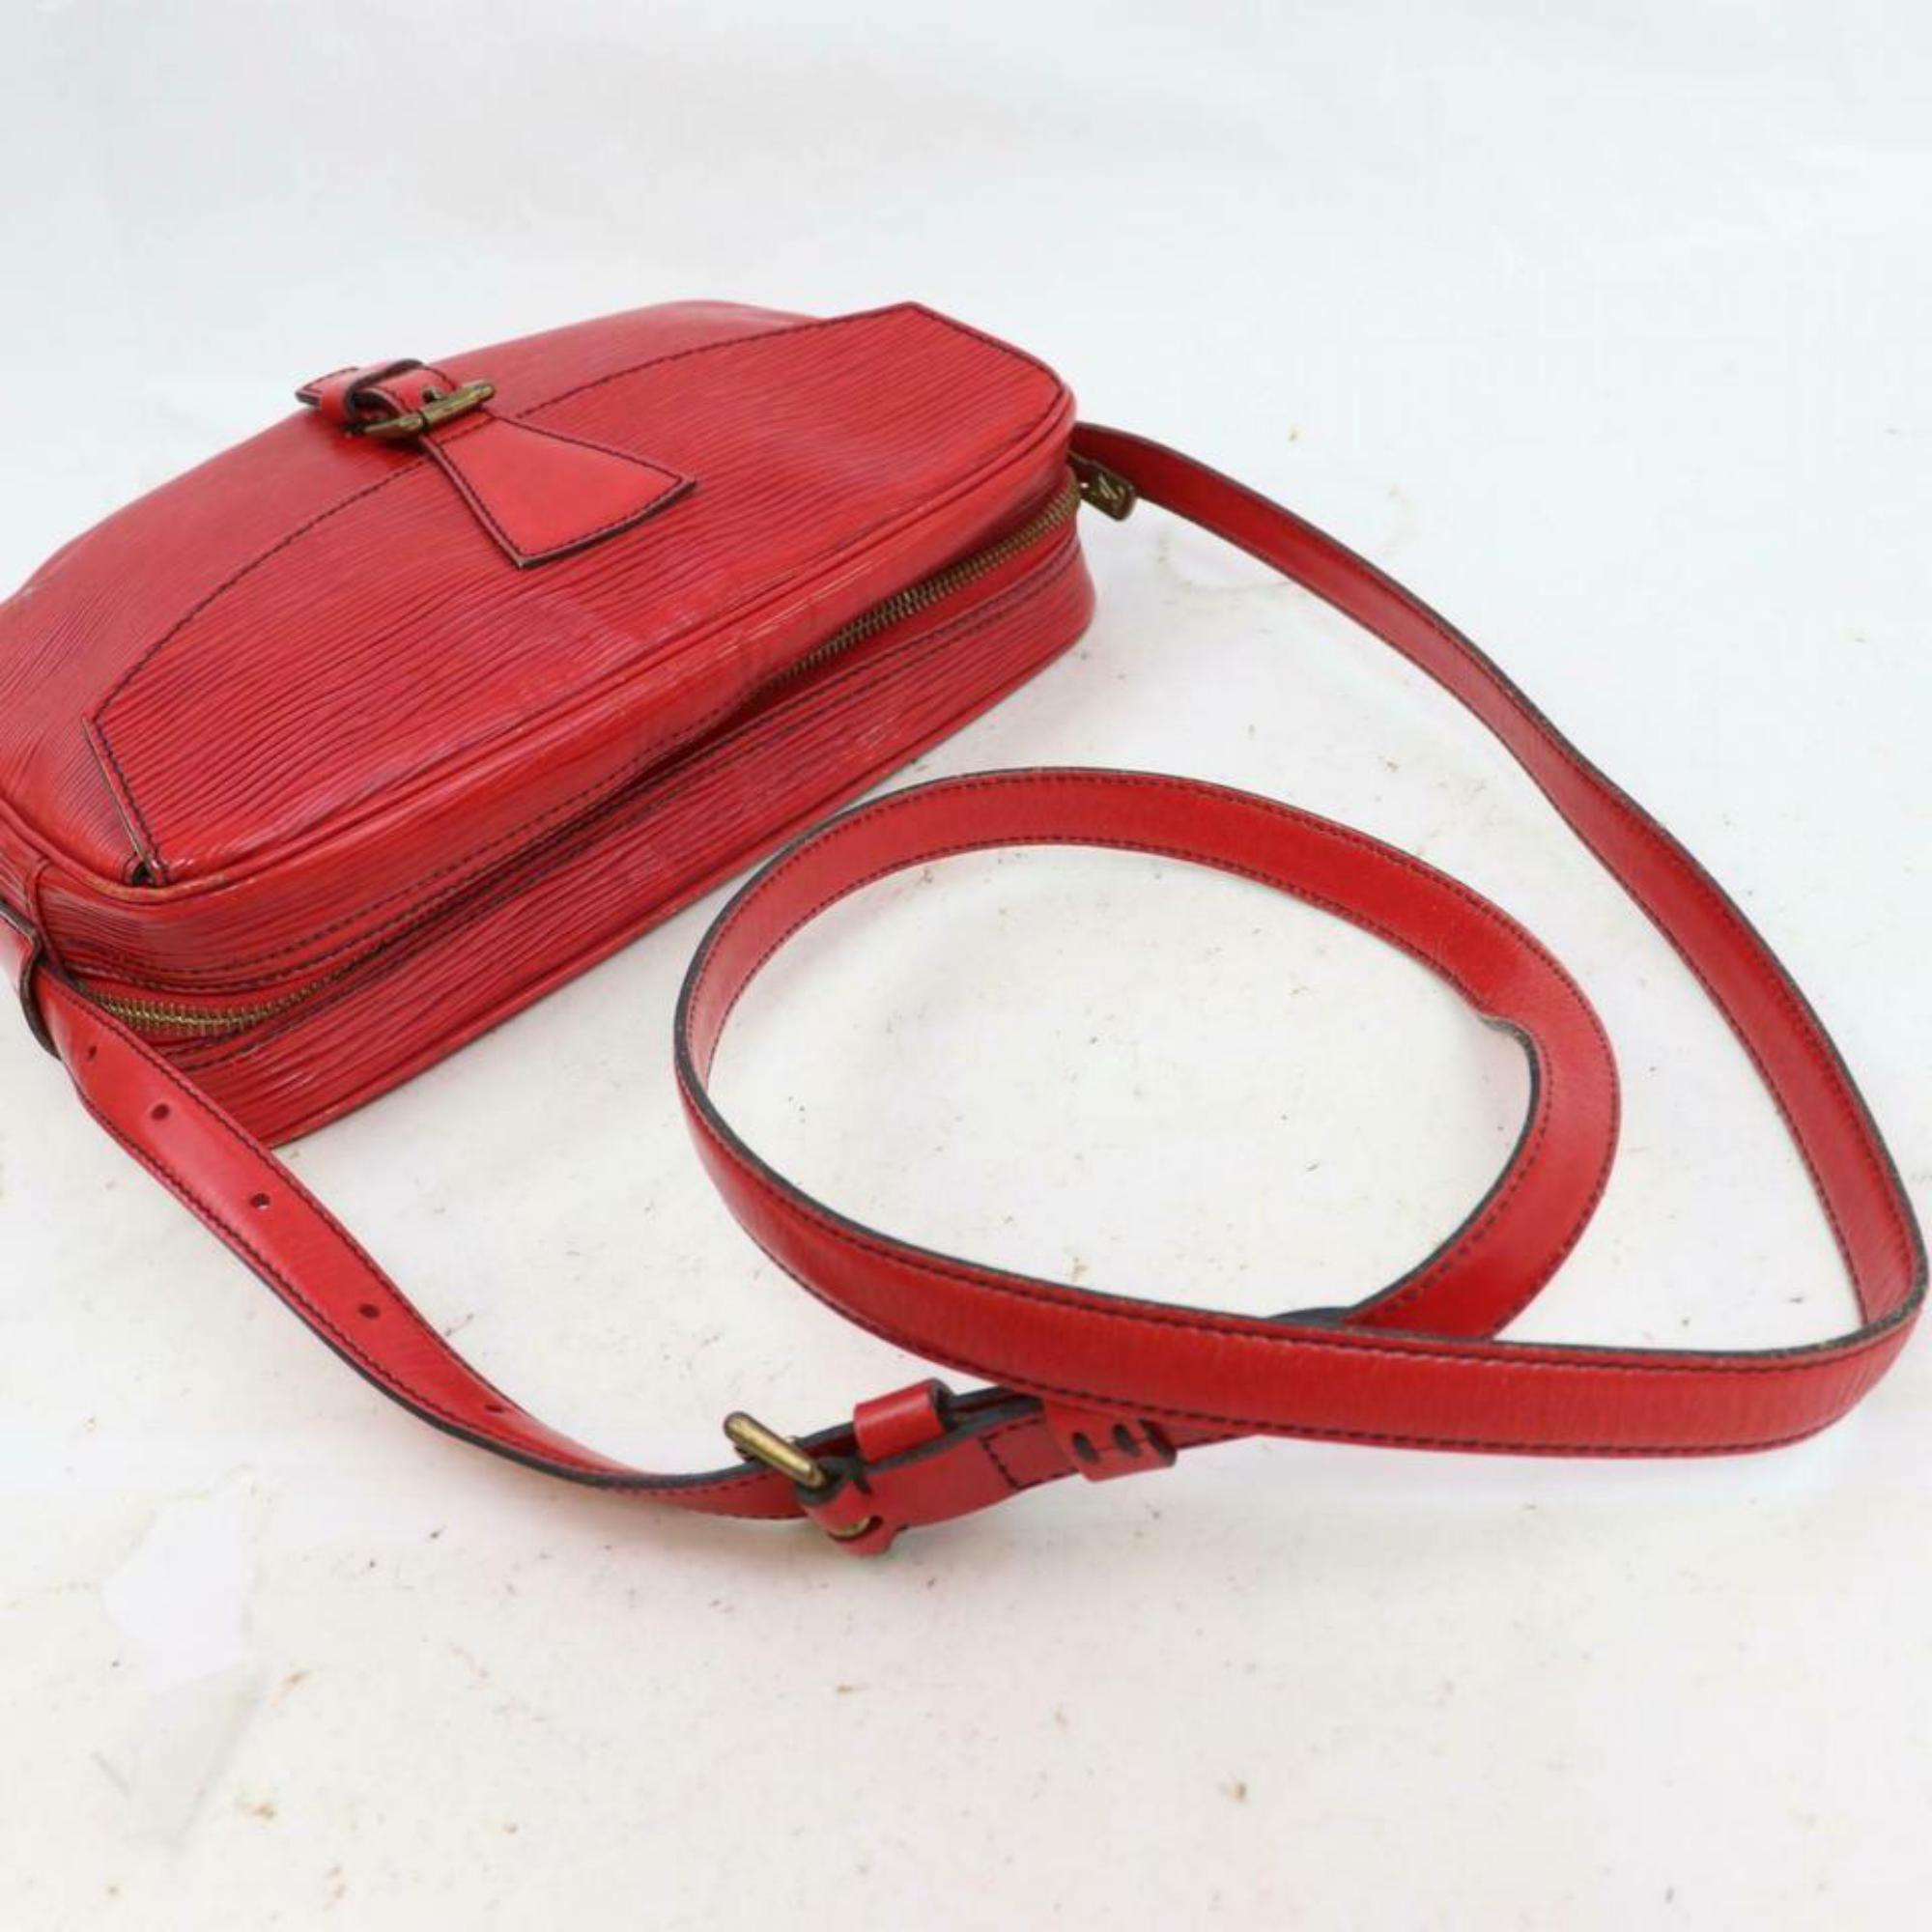 Louis Vuitton Jeune fille 870648 Red Epi Leather Cross Body Bag For Sale 7